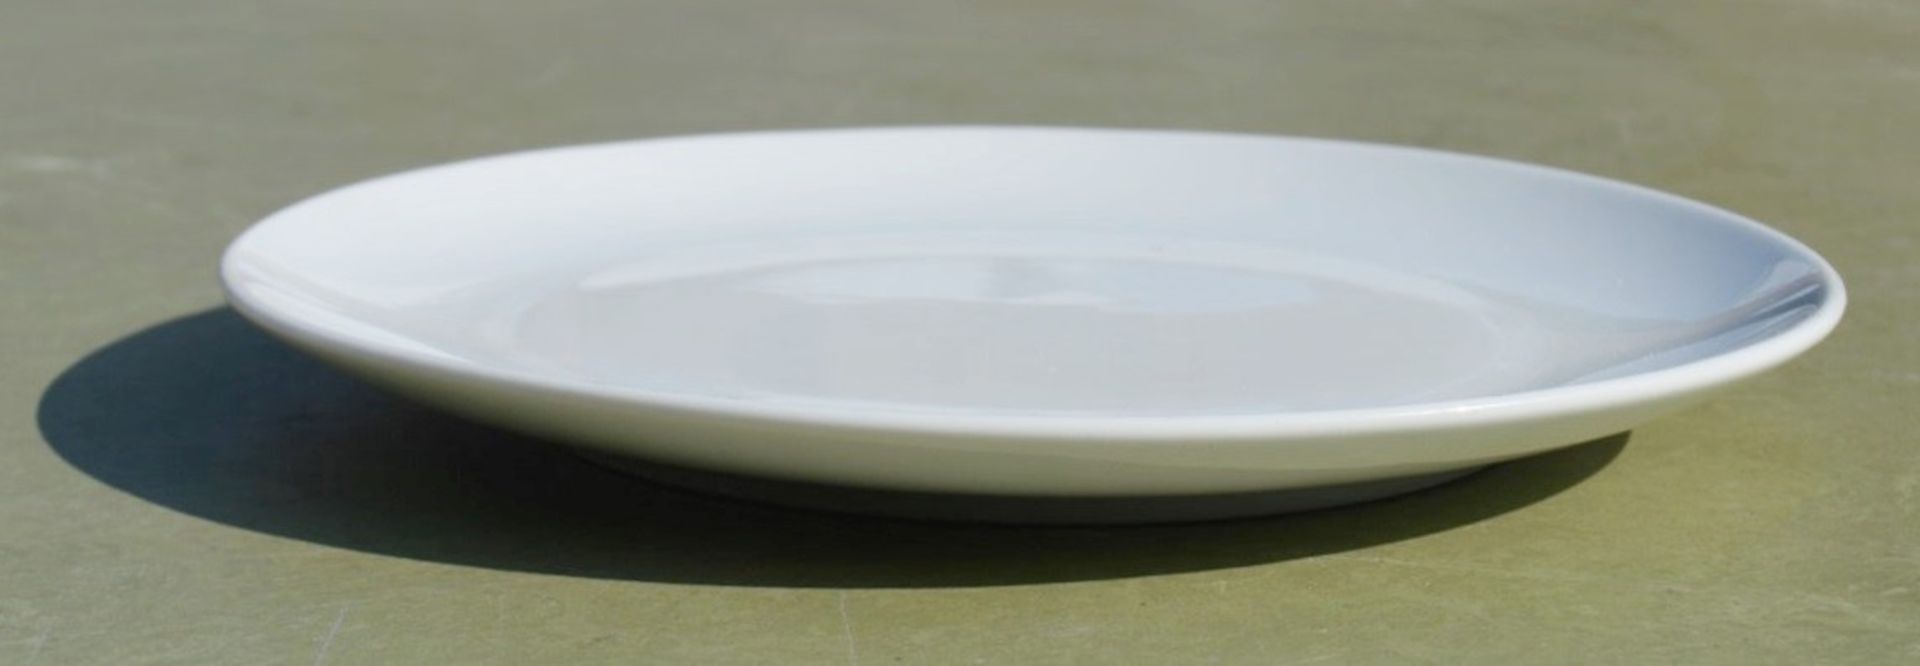 20 x PILLIVUYT Round 16cm Commercial Porcelain Bread / Cake Plates In White - Made In France - - Image 4 of 4